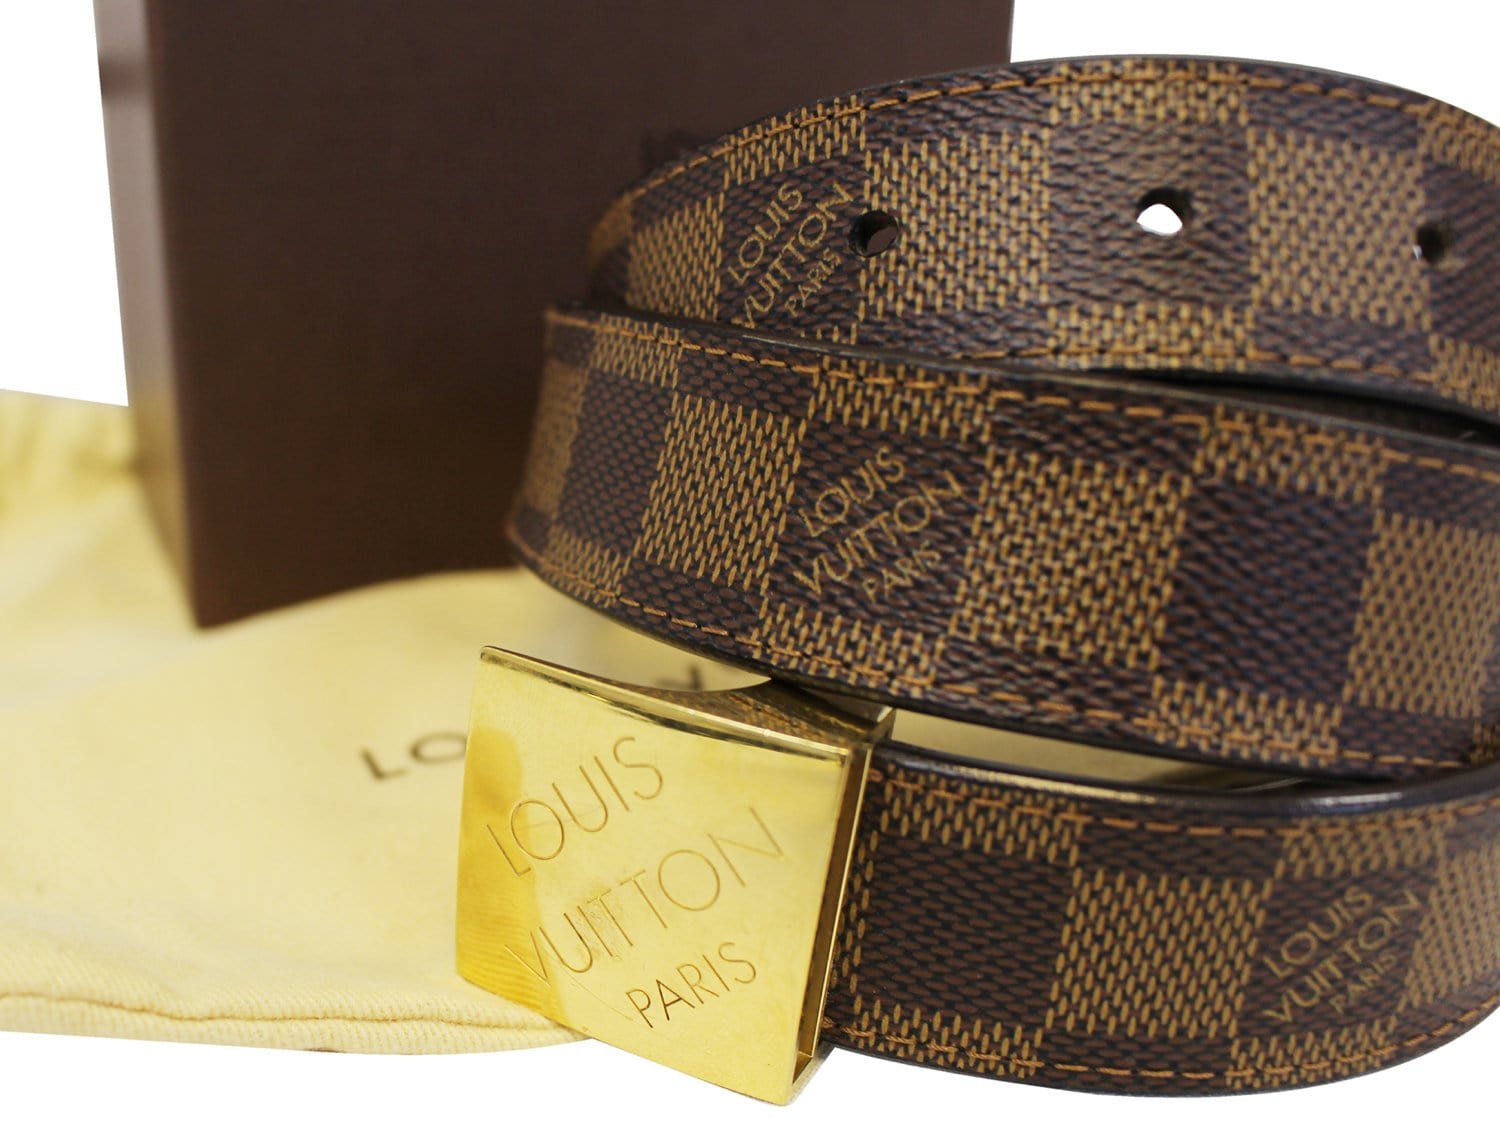 Daily multi pocket cloth belt Louis Vuitton Brown size 80 cm in Fabric -  32049725